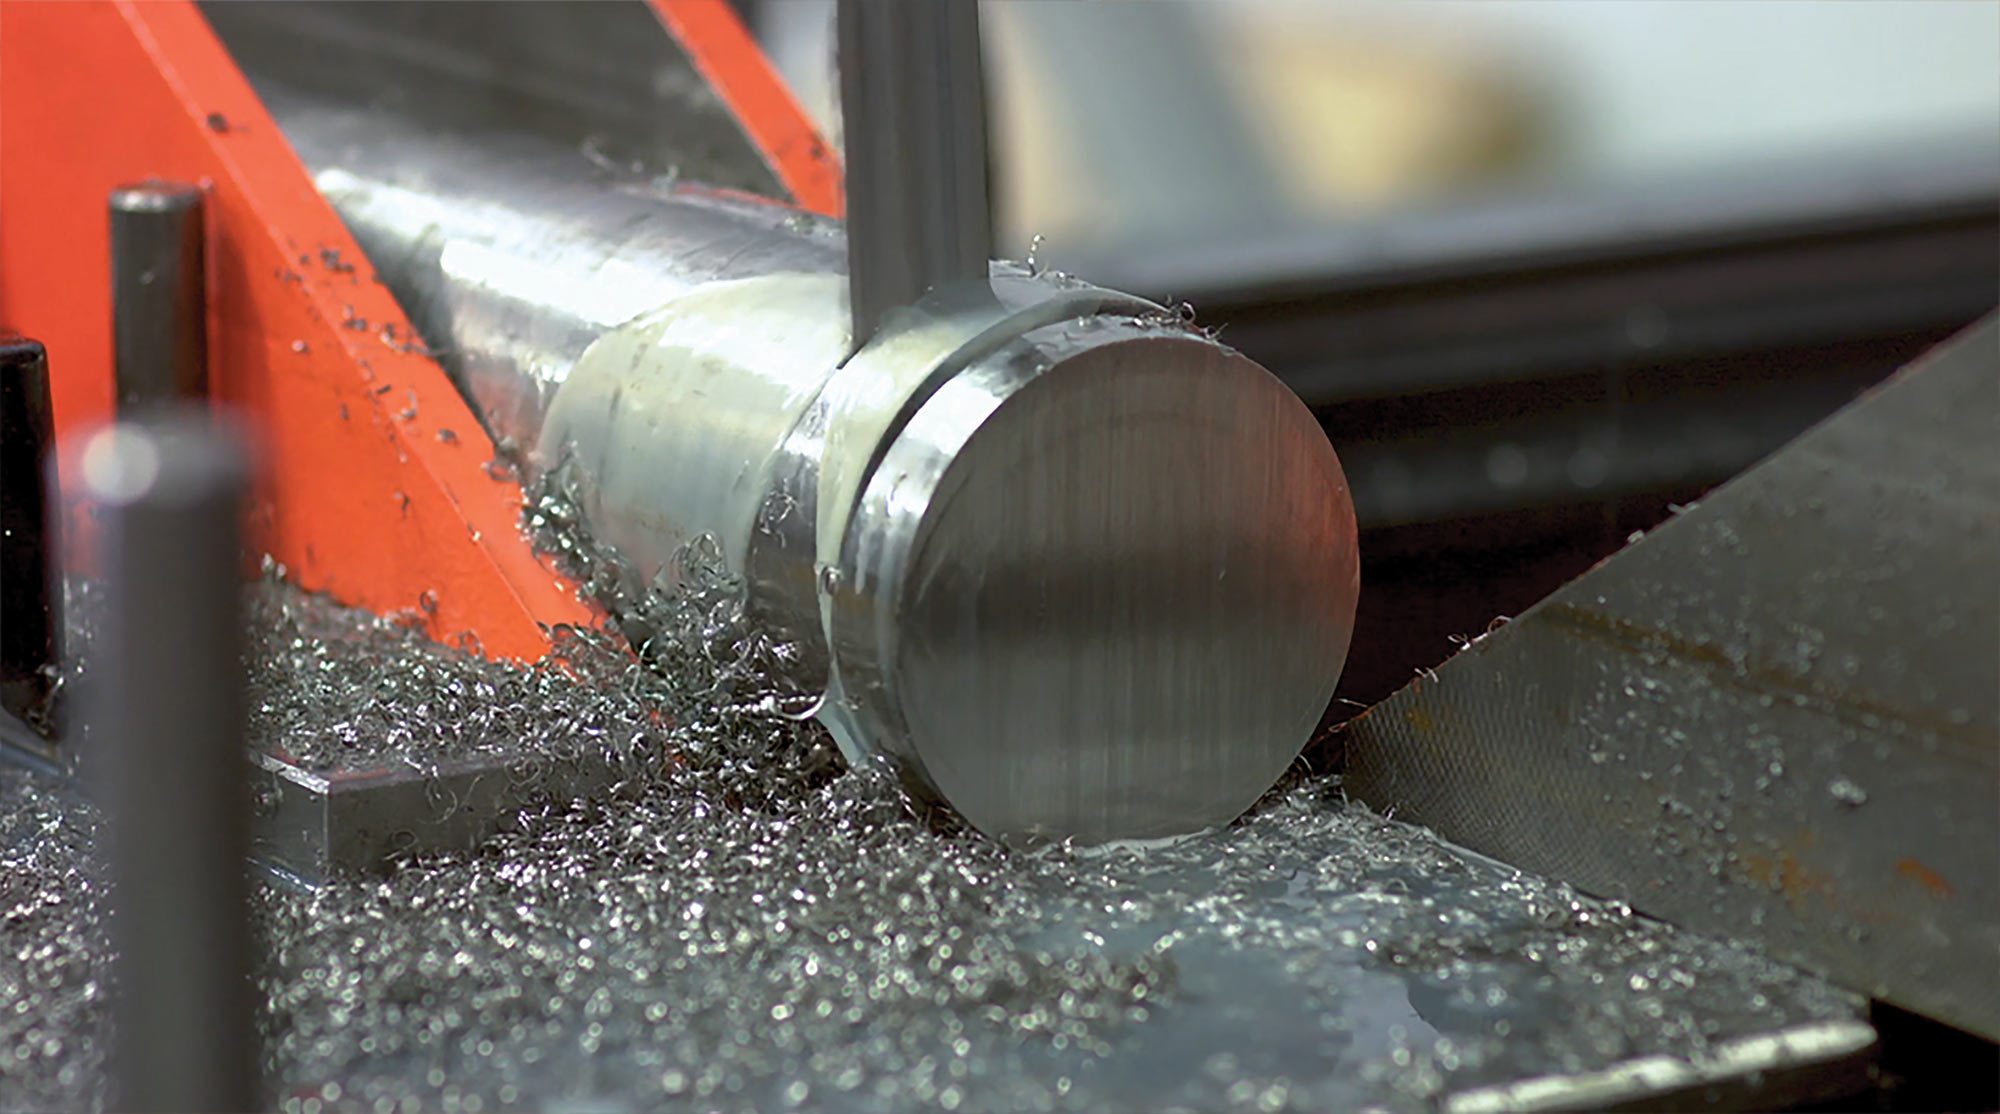 304 stainless steel being cut at opposing 6-degree angles